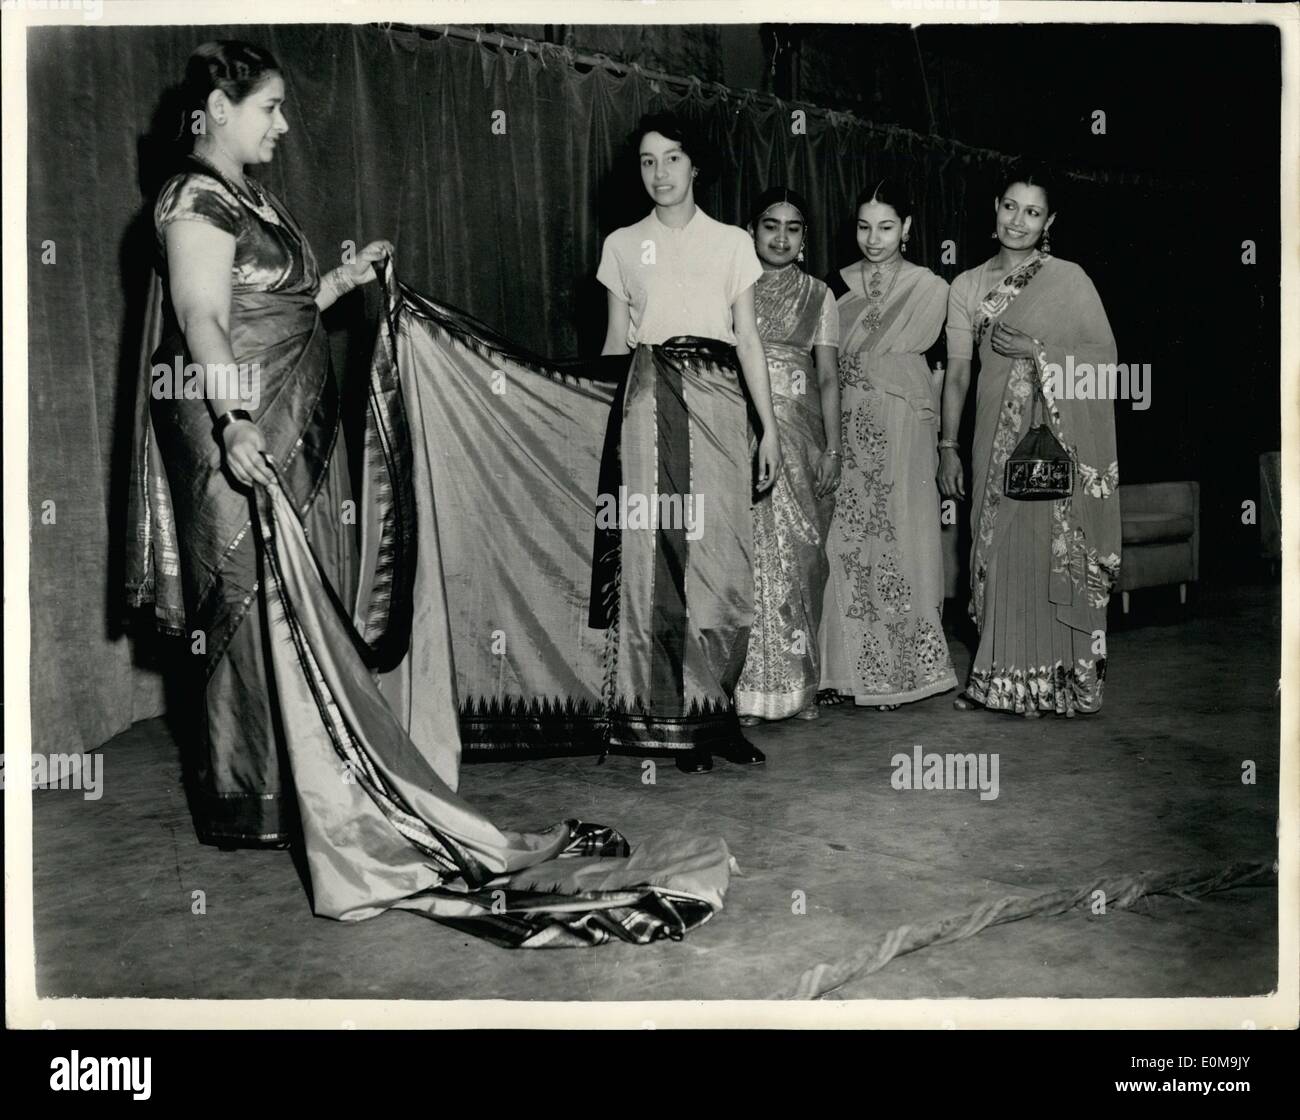 Apr. 04, 1954 - Women of Ceylon take part in TV programme: Today is Caylon's New Year Day, and members of the Association of the Women of Ceylon over here took part in the ''Leisure and Pleasure'' programme. Photo shows Mrs. Casinader demonstrates the length and fitting of a sari to TV viewers. Stock Photo